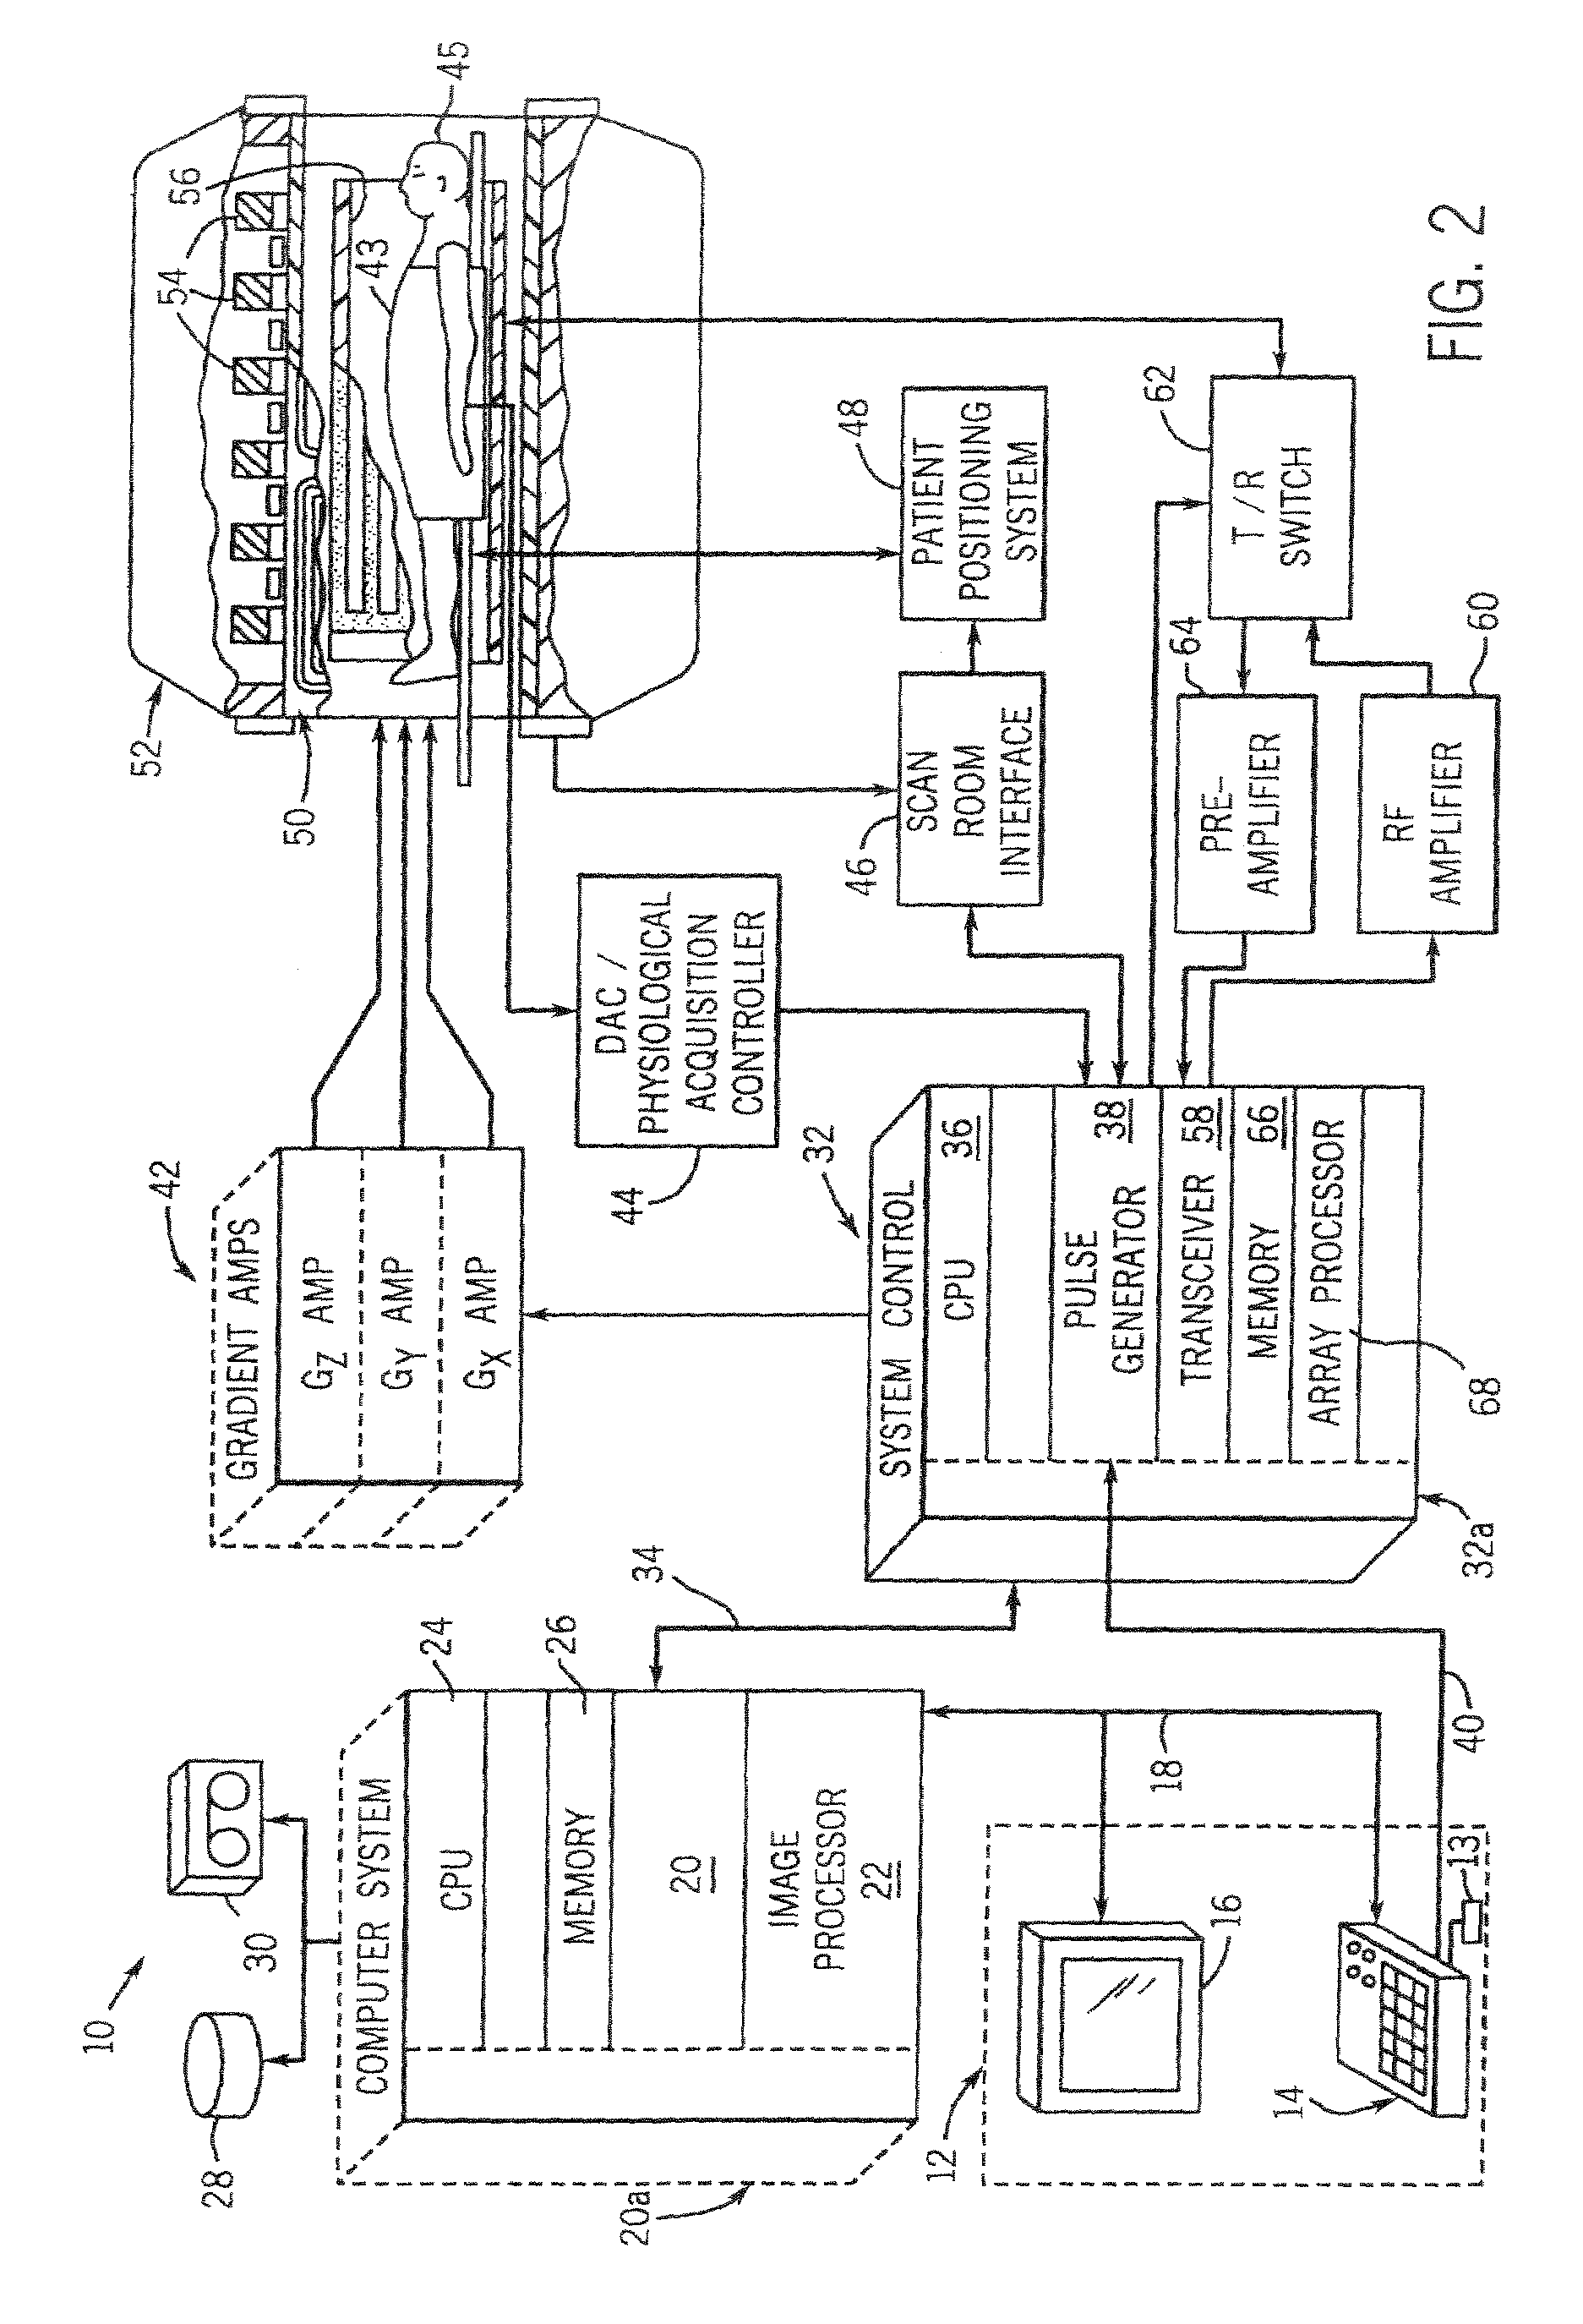 System and method for MR data acquisition with uniform fat suppression